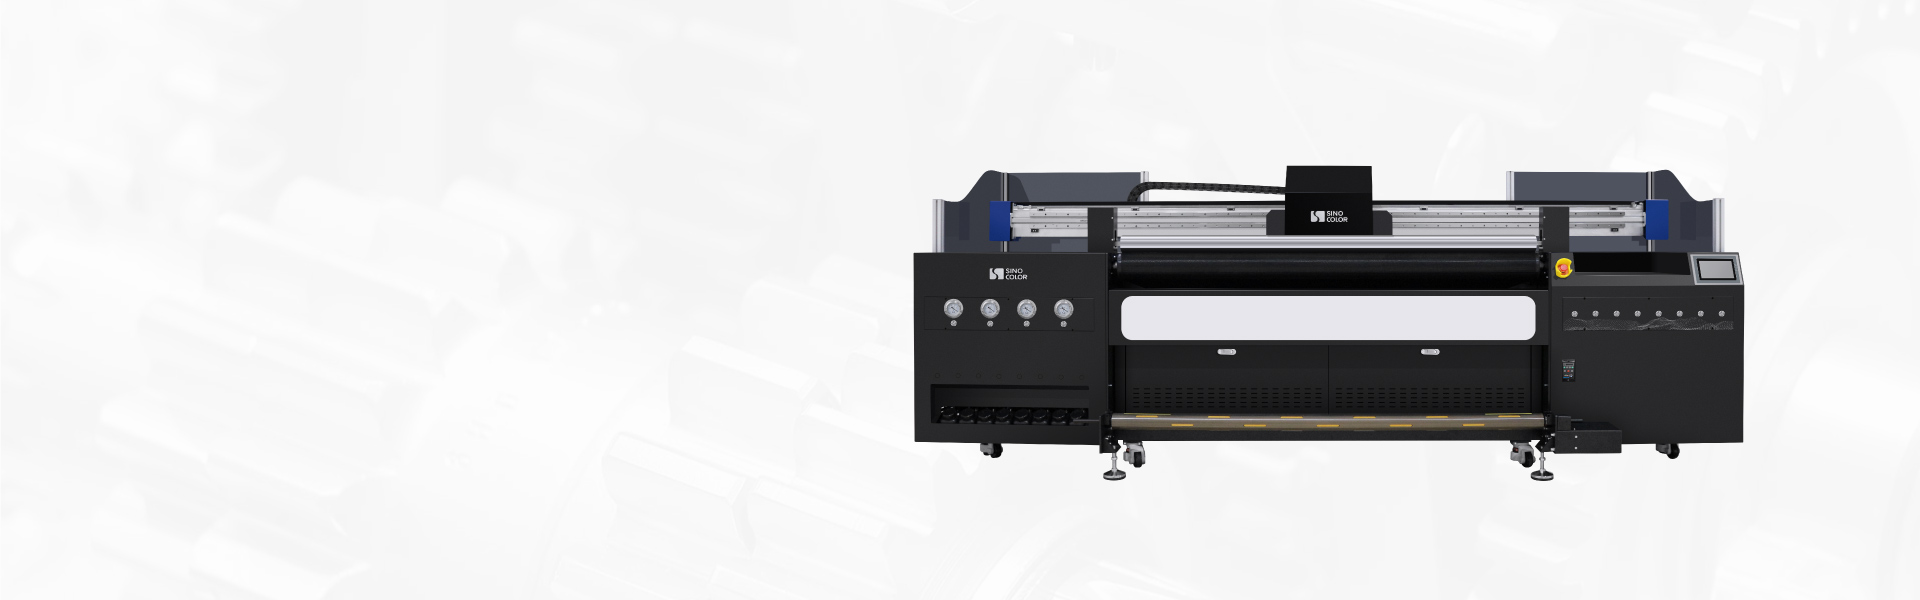 https://www.irucai.com/products/uv-printer/uv-roll-to-roll-printer/uvcoil-plate.html images